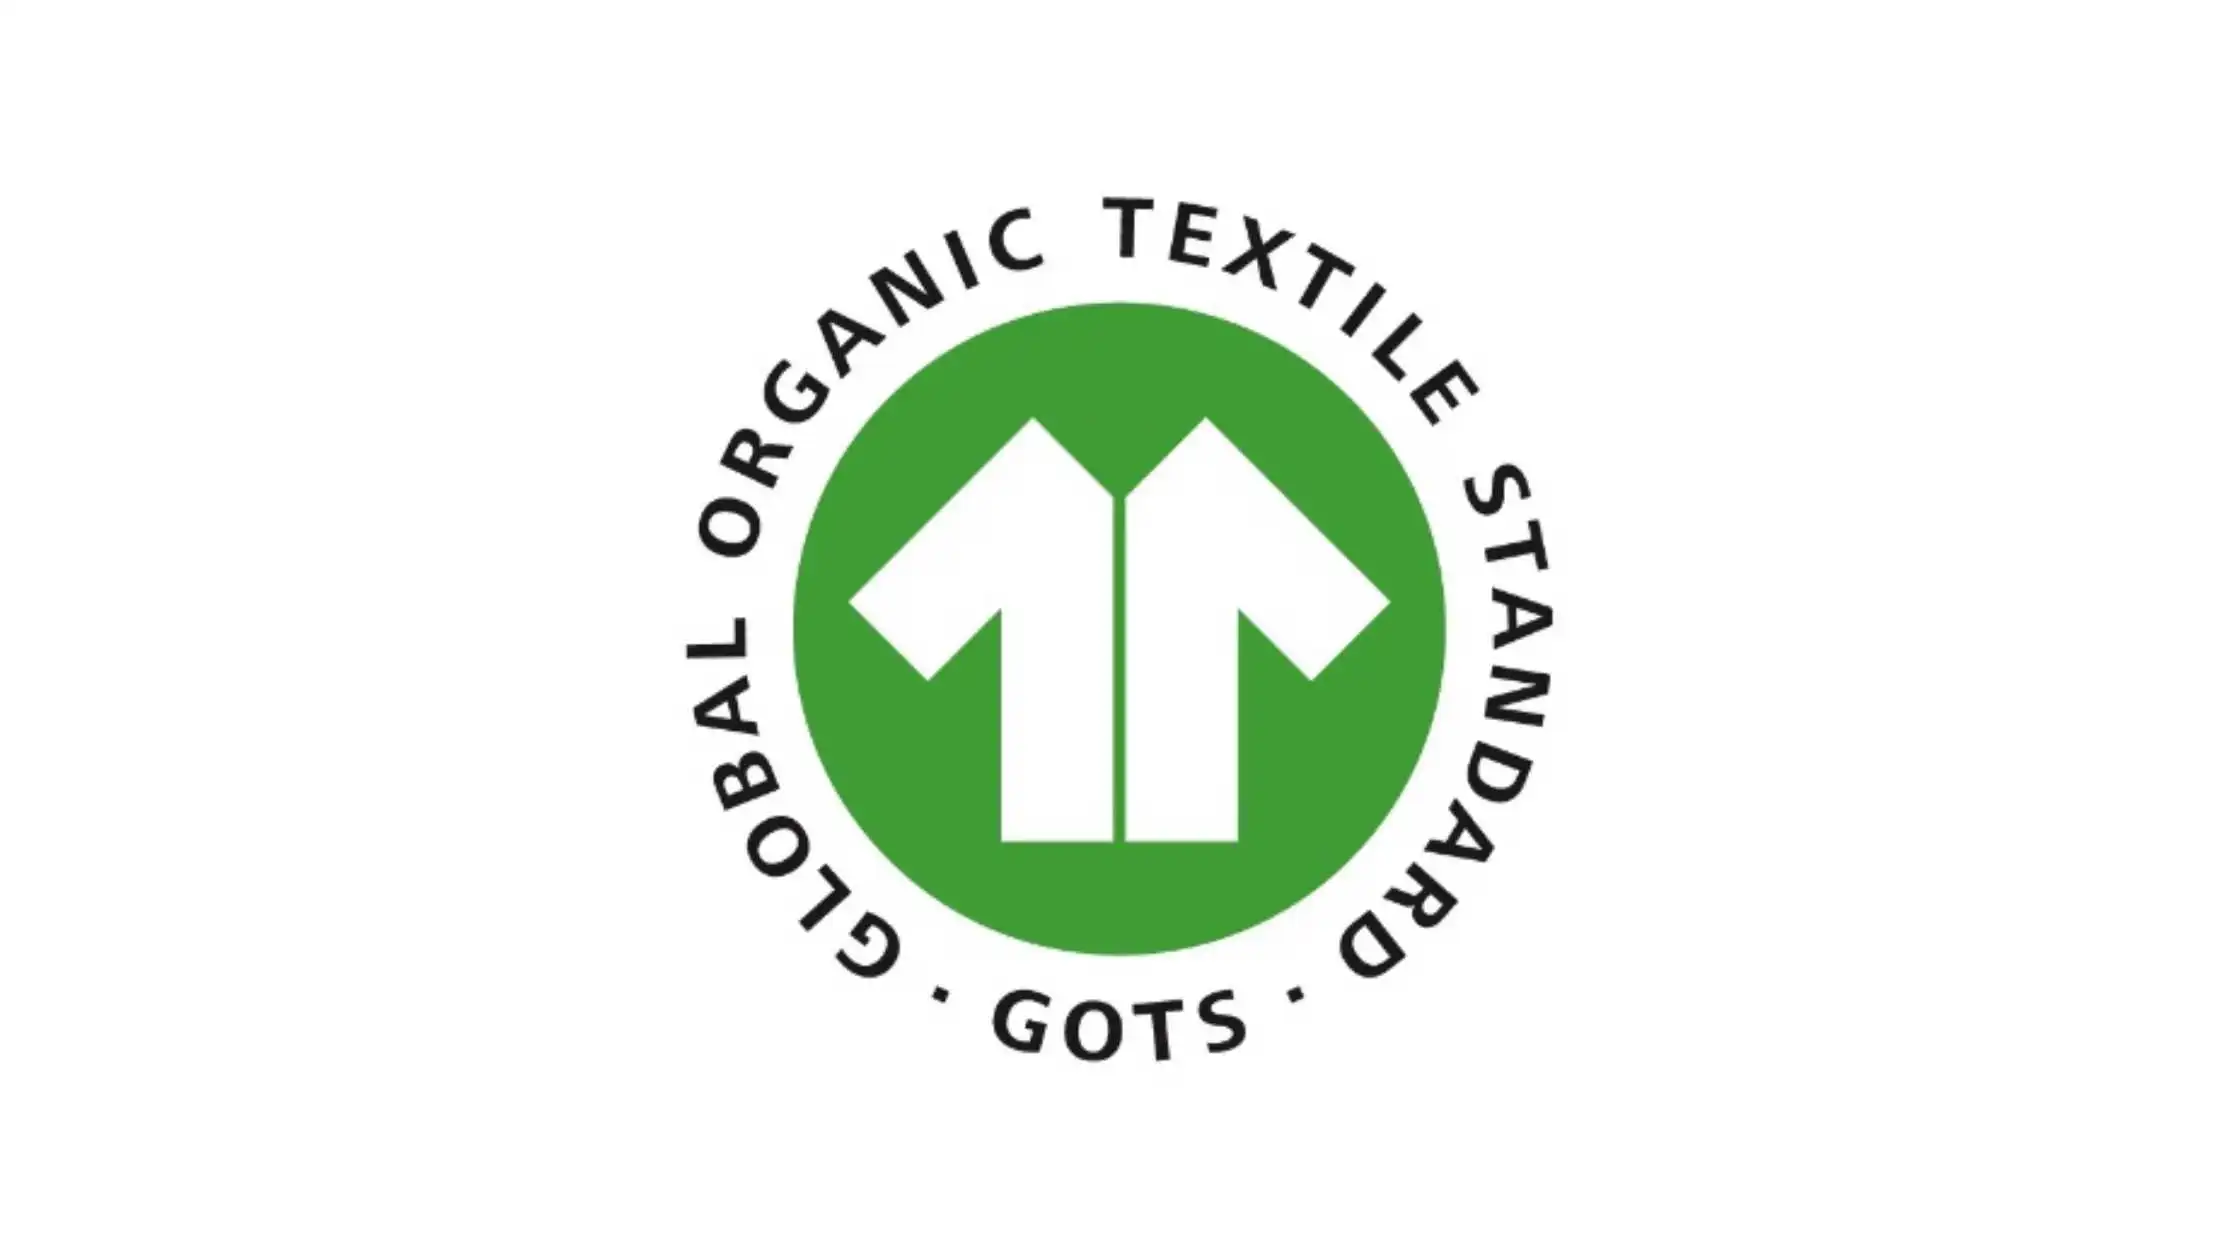 The Hemp Republic has Certifications from the Global Organic Textile standard